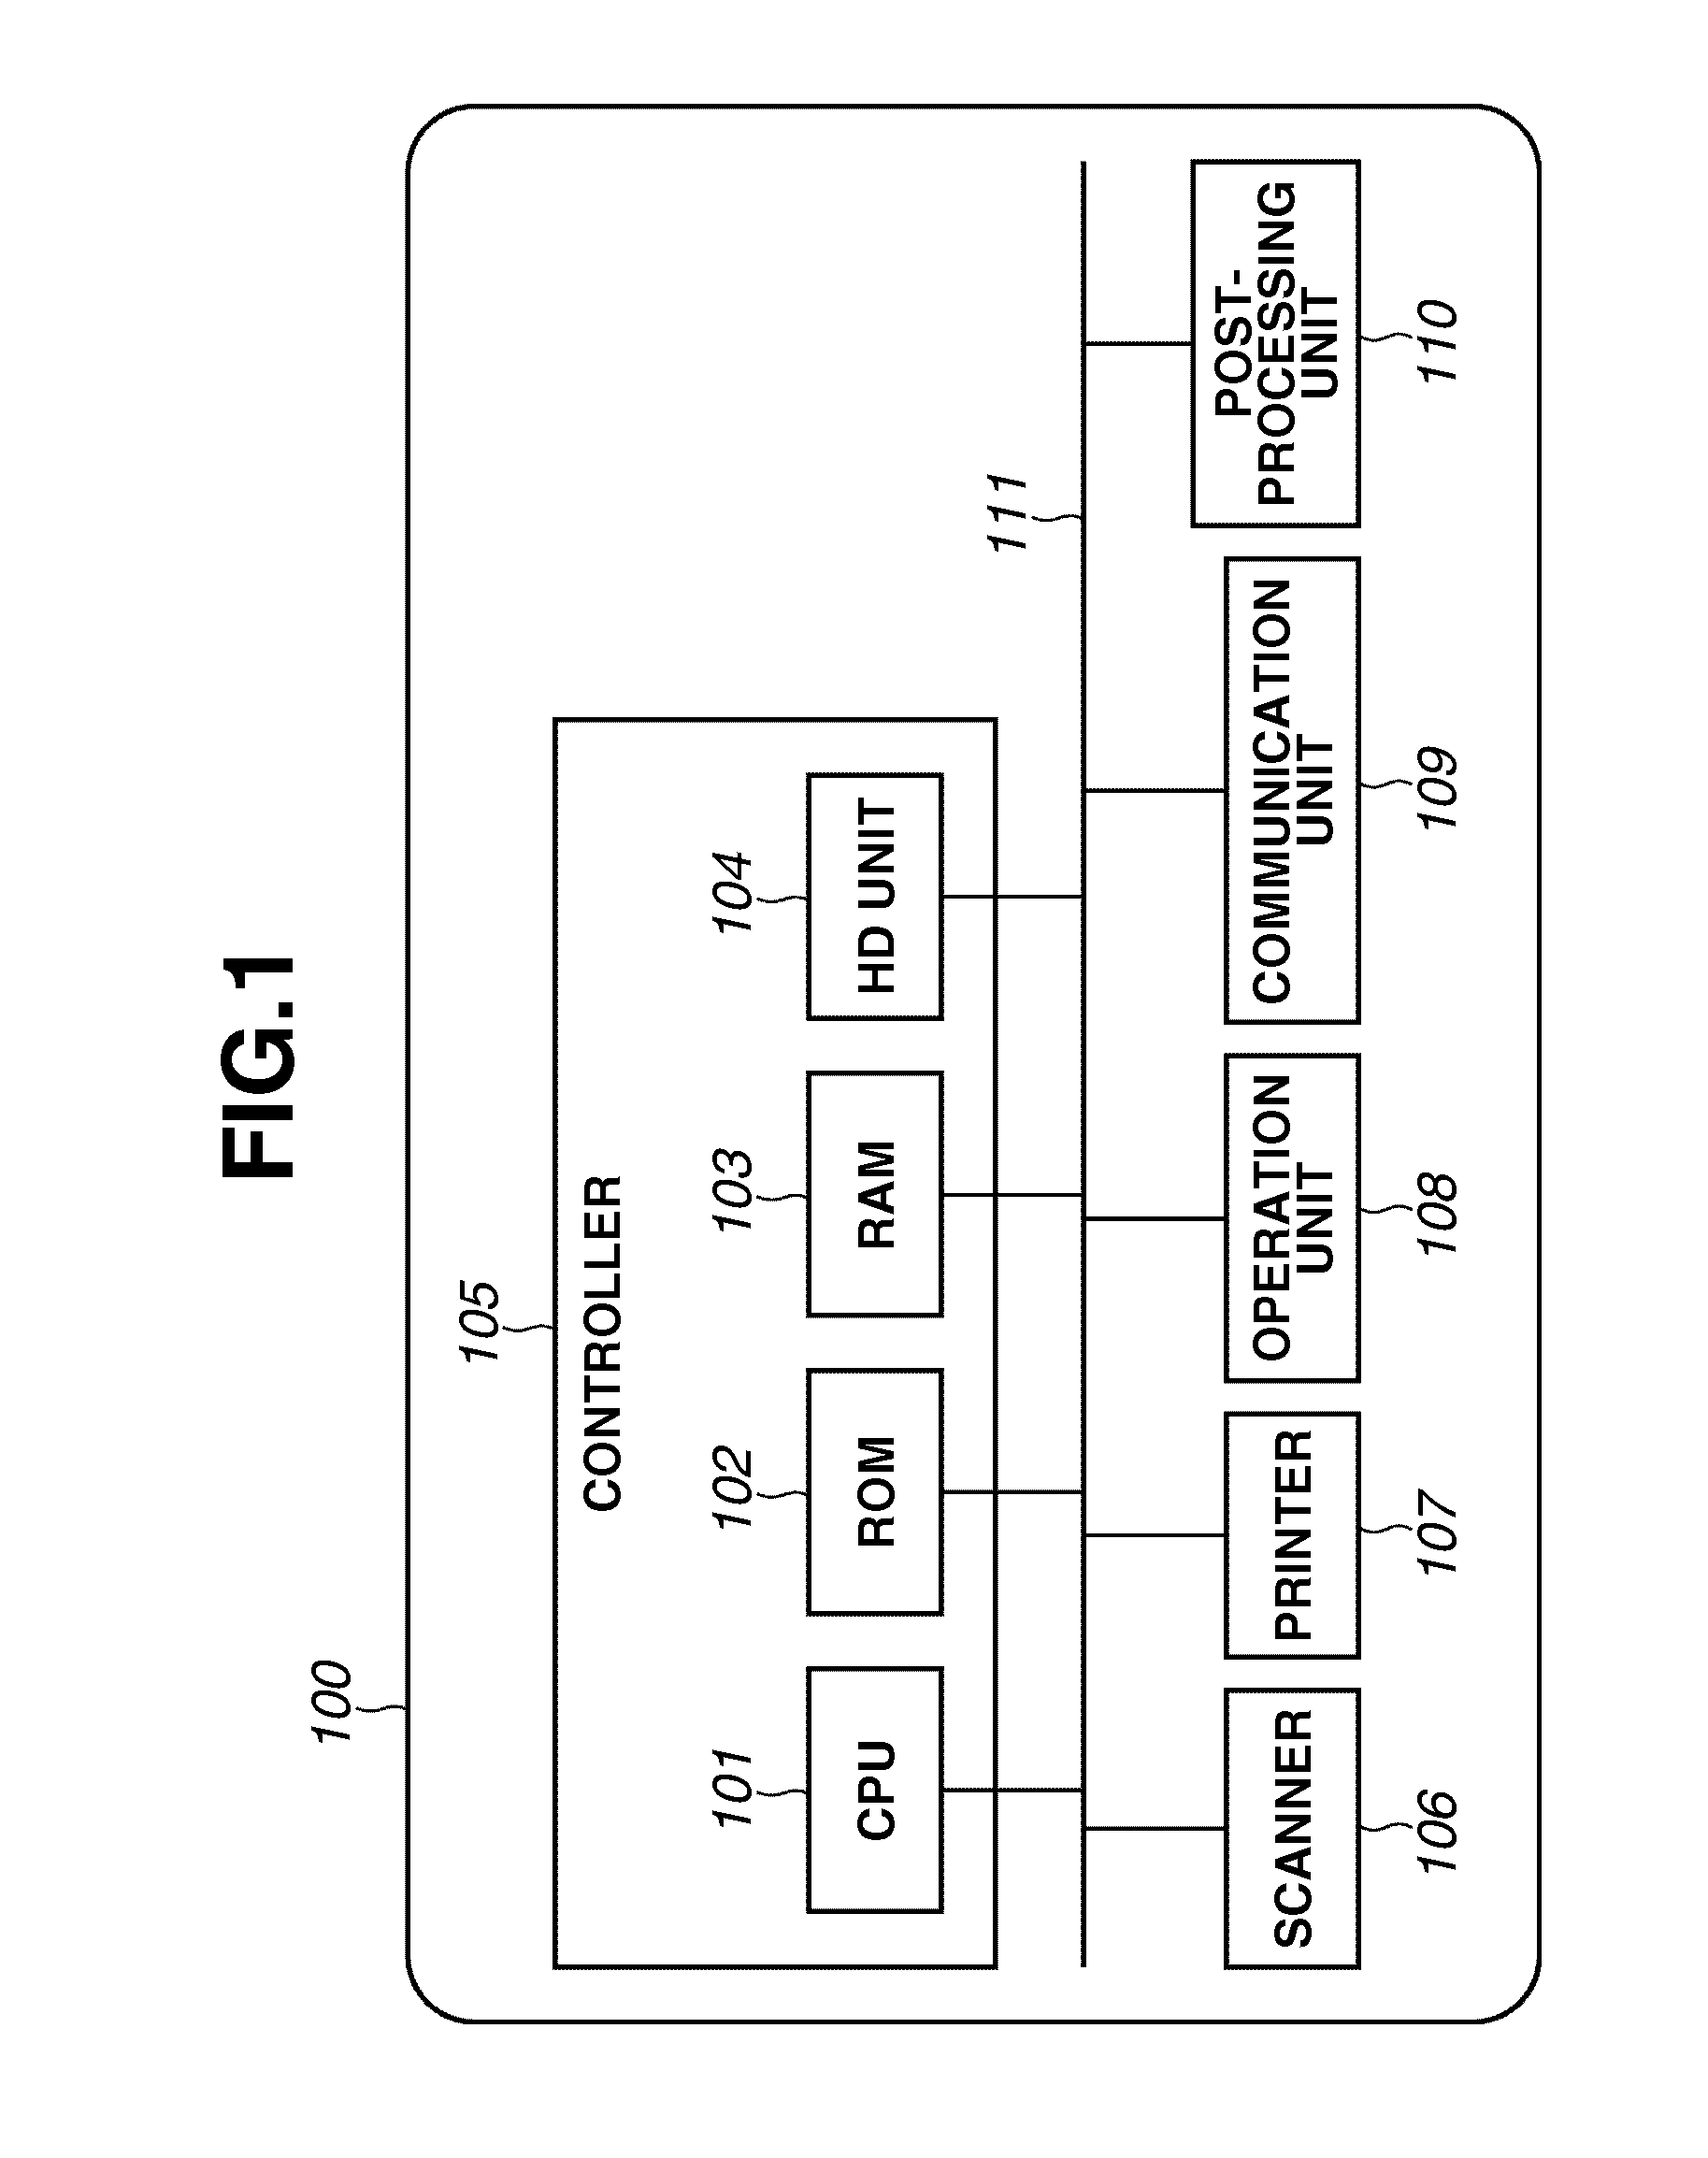 Image forming apparatus, management system, and method thereof